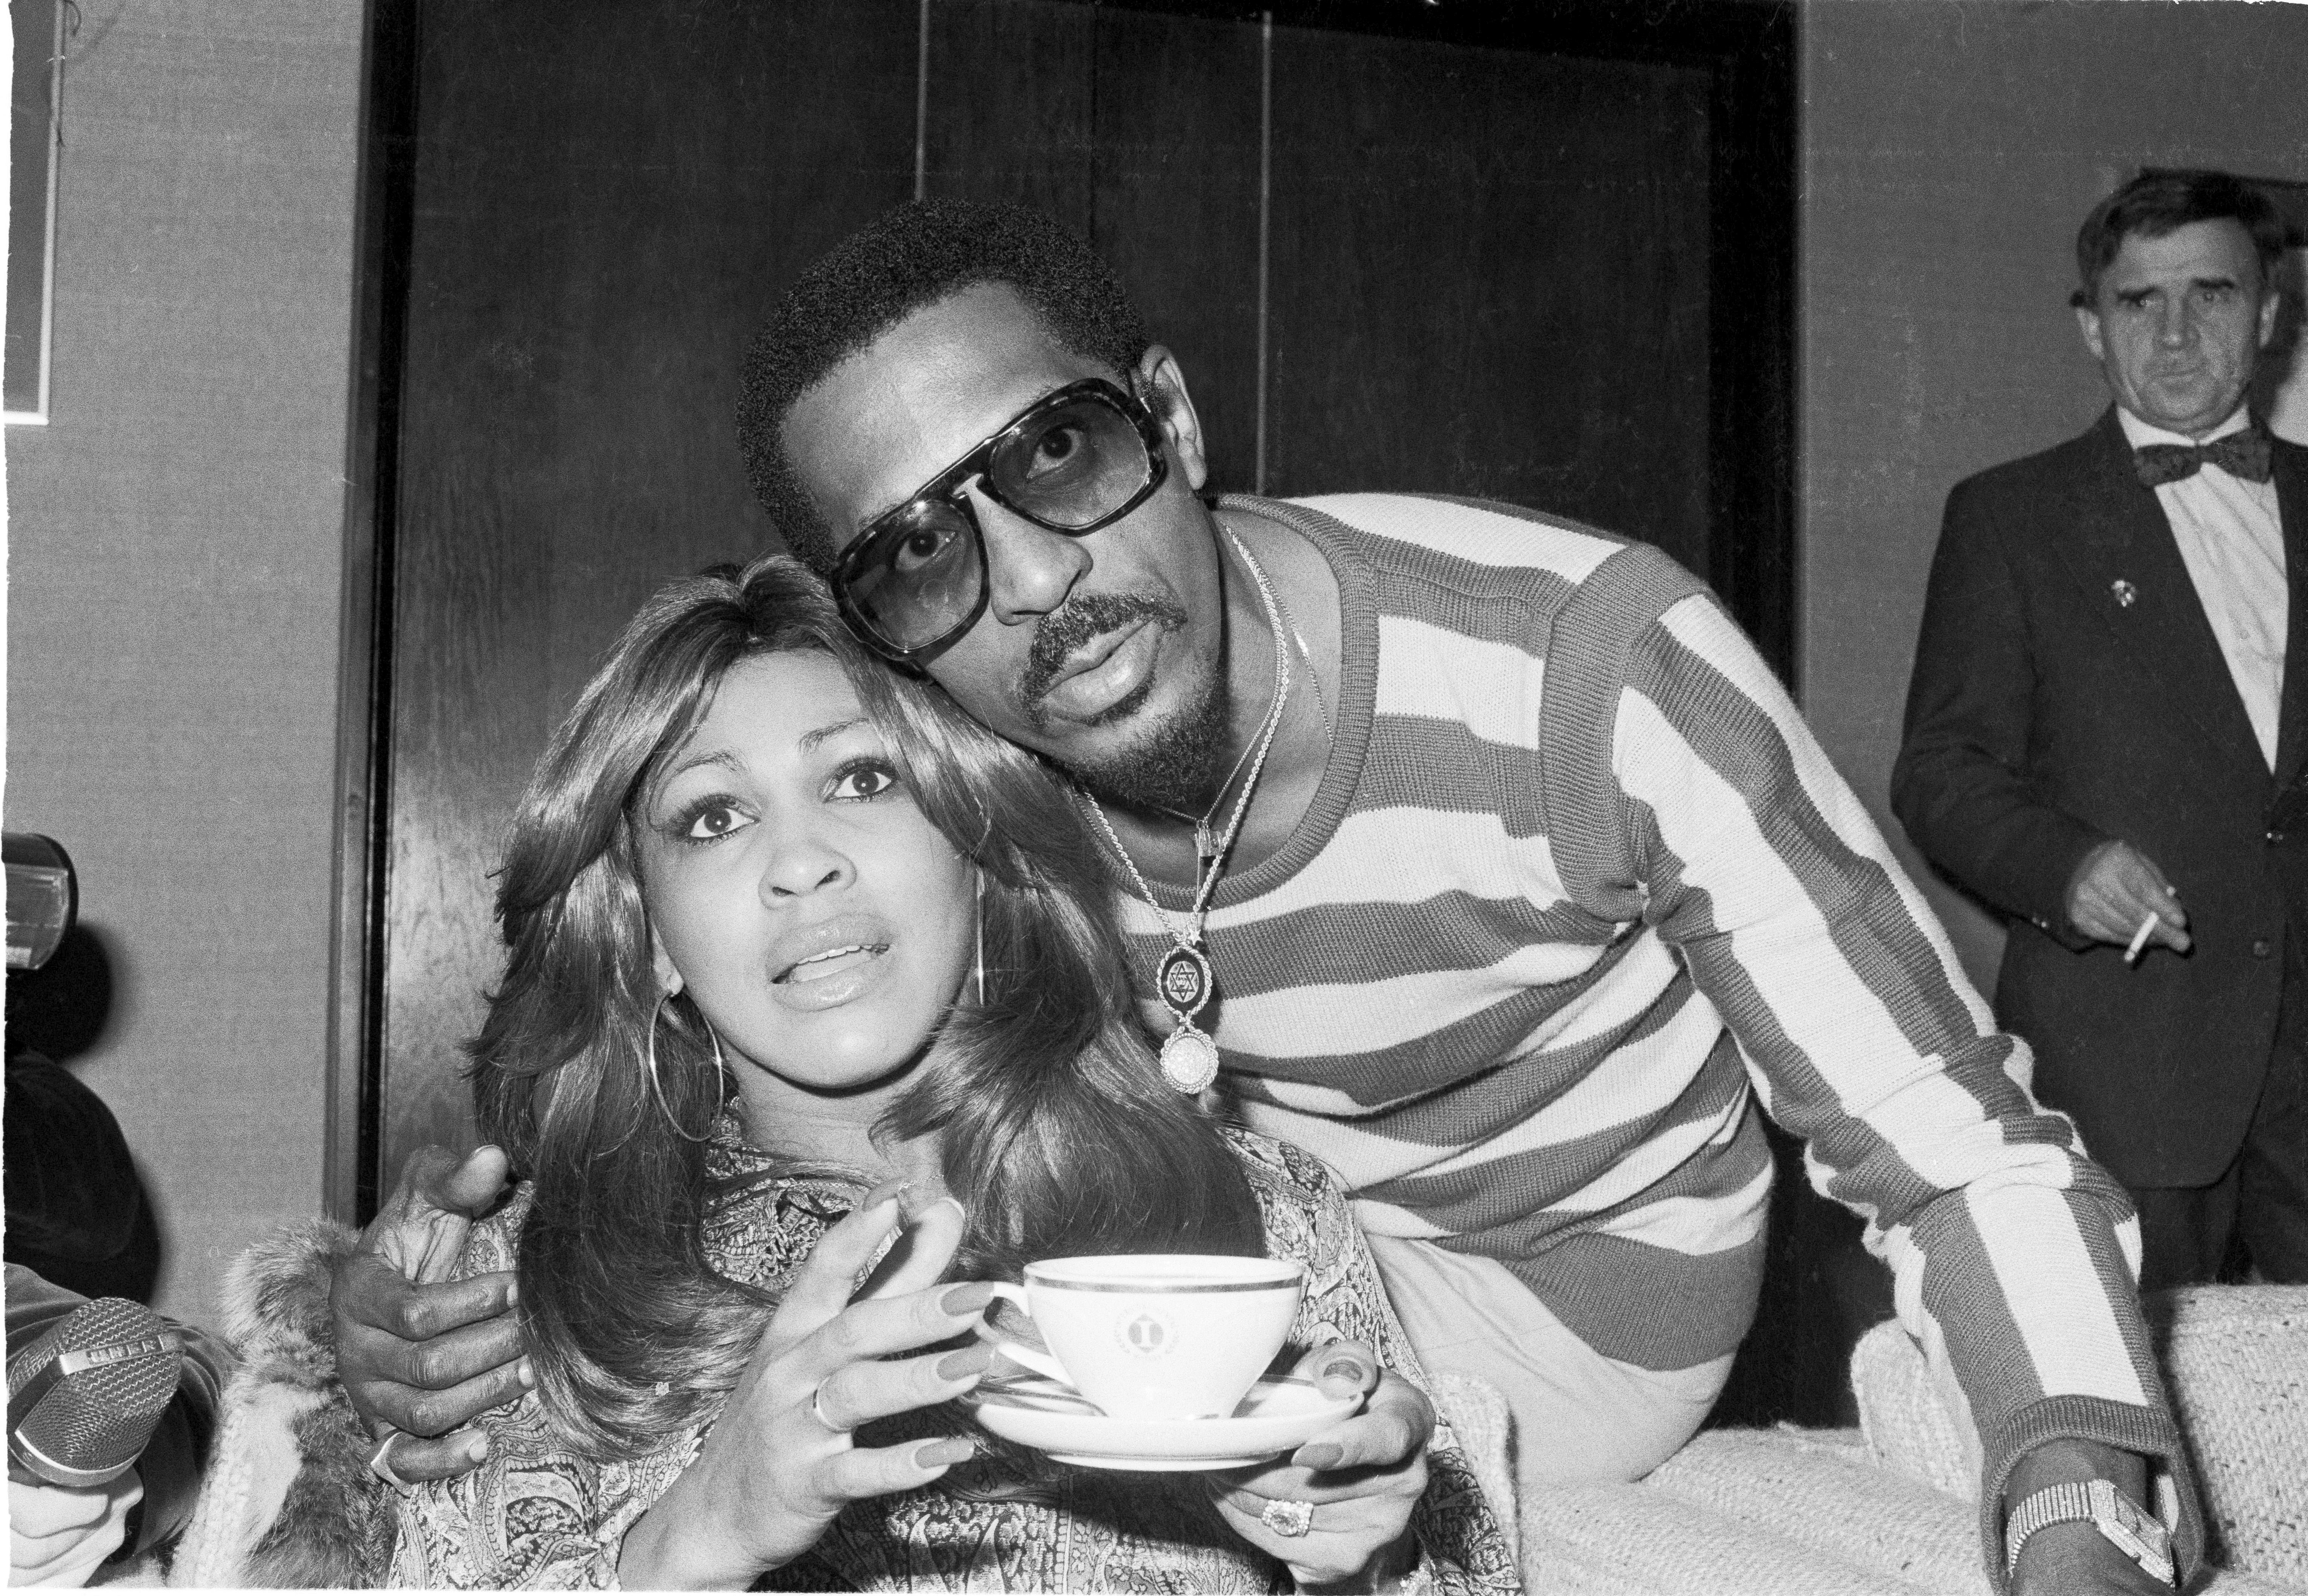 Tina Turner and Ike Turner, portrait, London, October 1975. | Photo: Getty Images